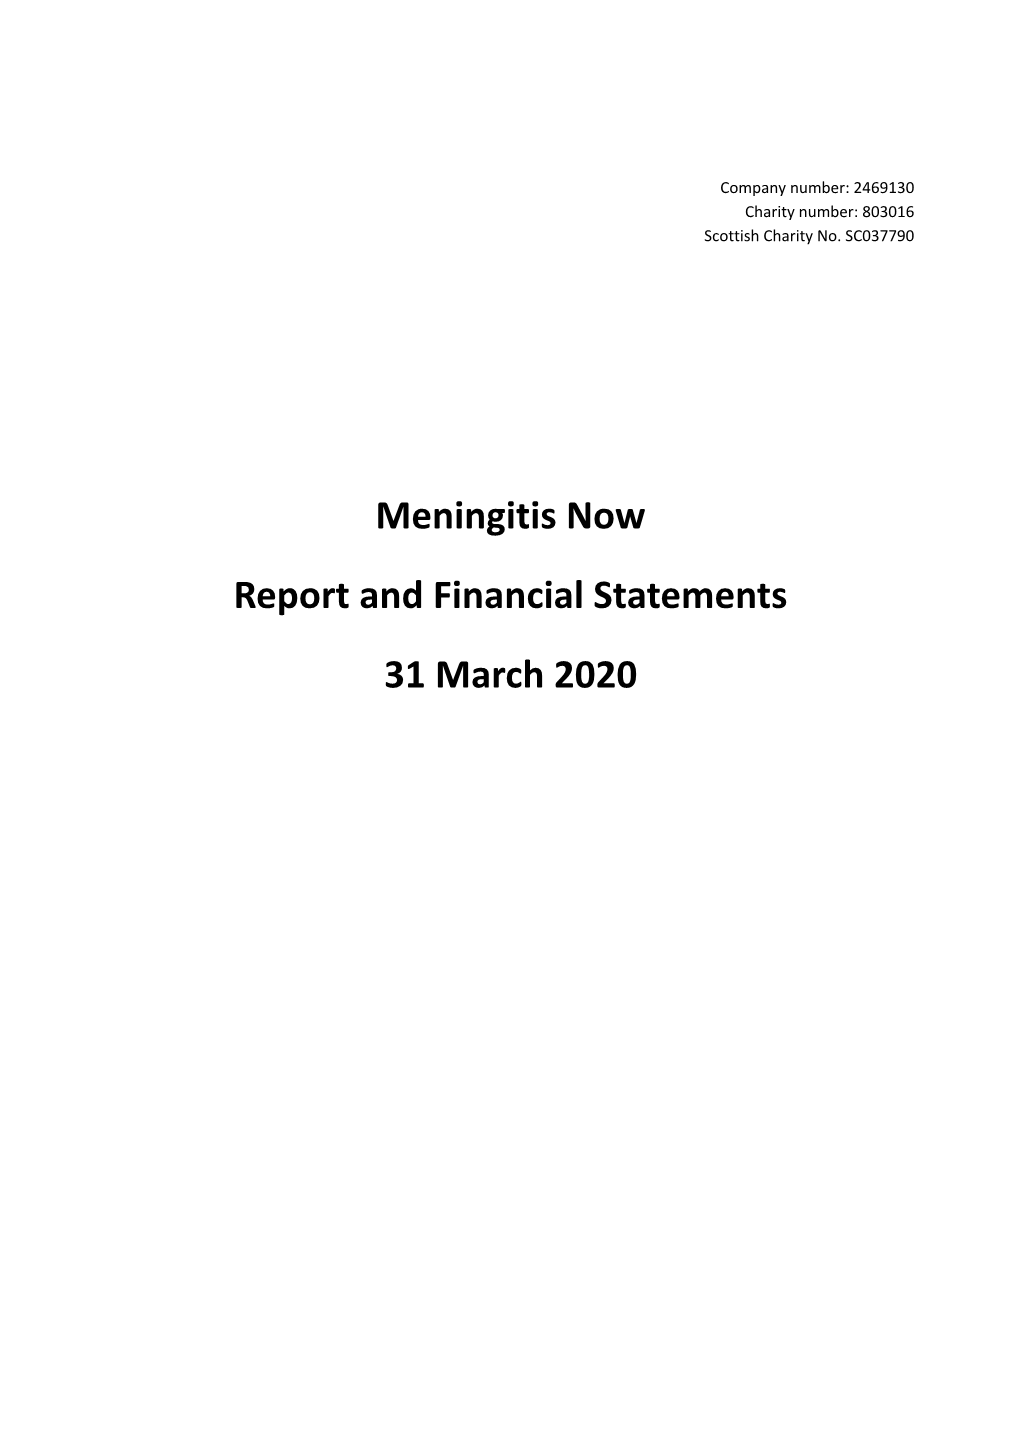 Meningitis Now Report and Financial Statements 31 March 2020